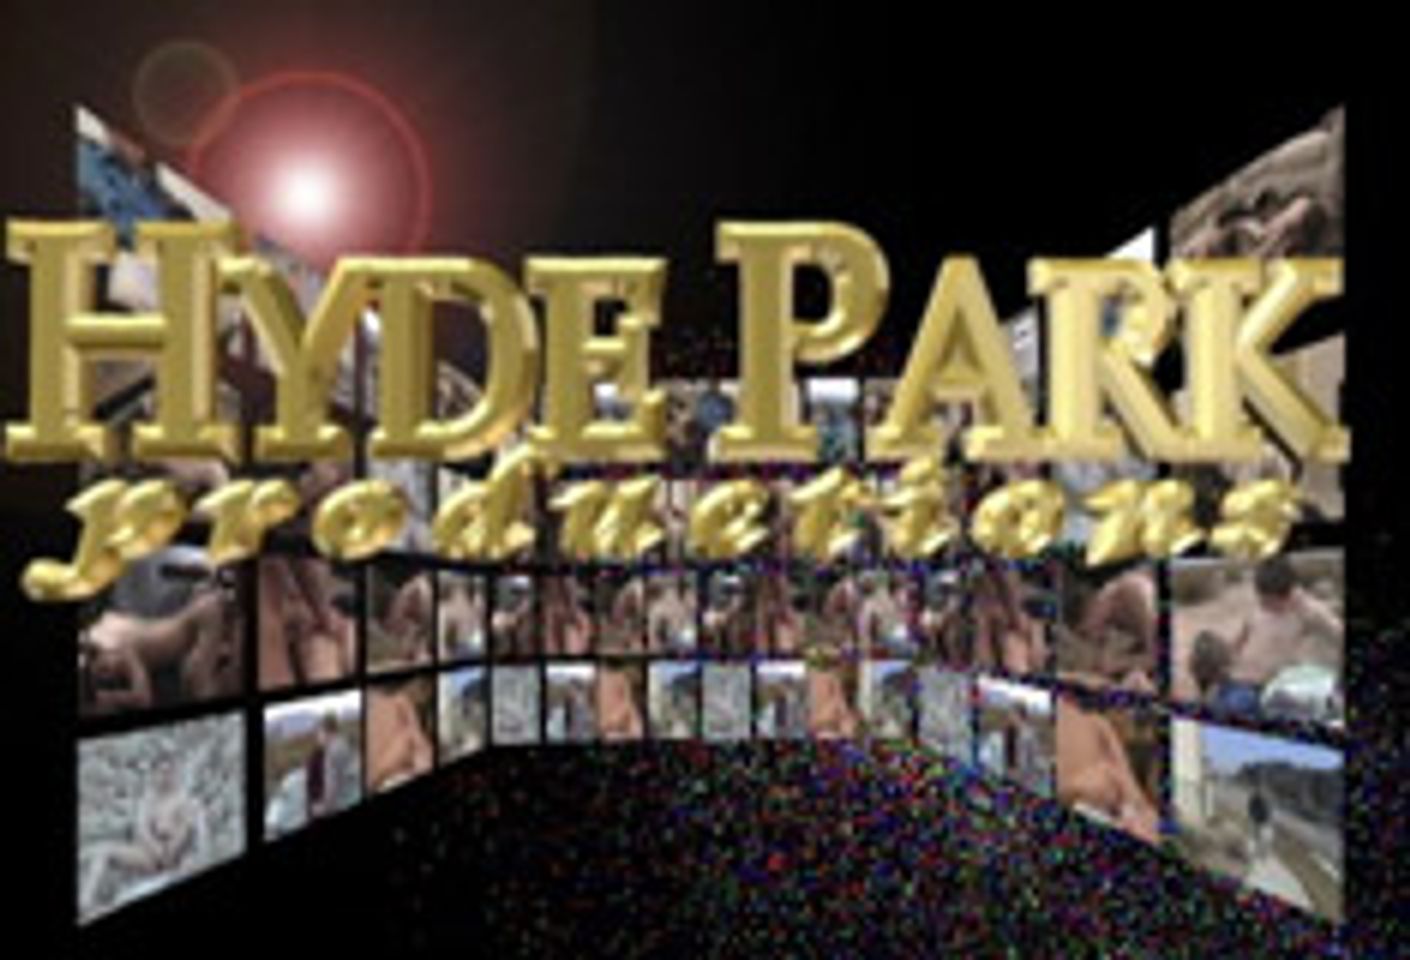 Marina Pacific to Distribute Hyde Park Twinks